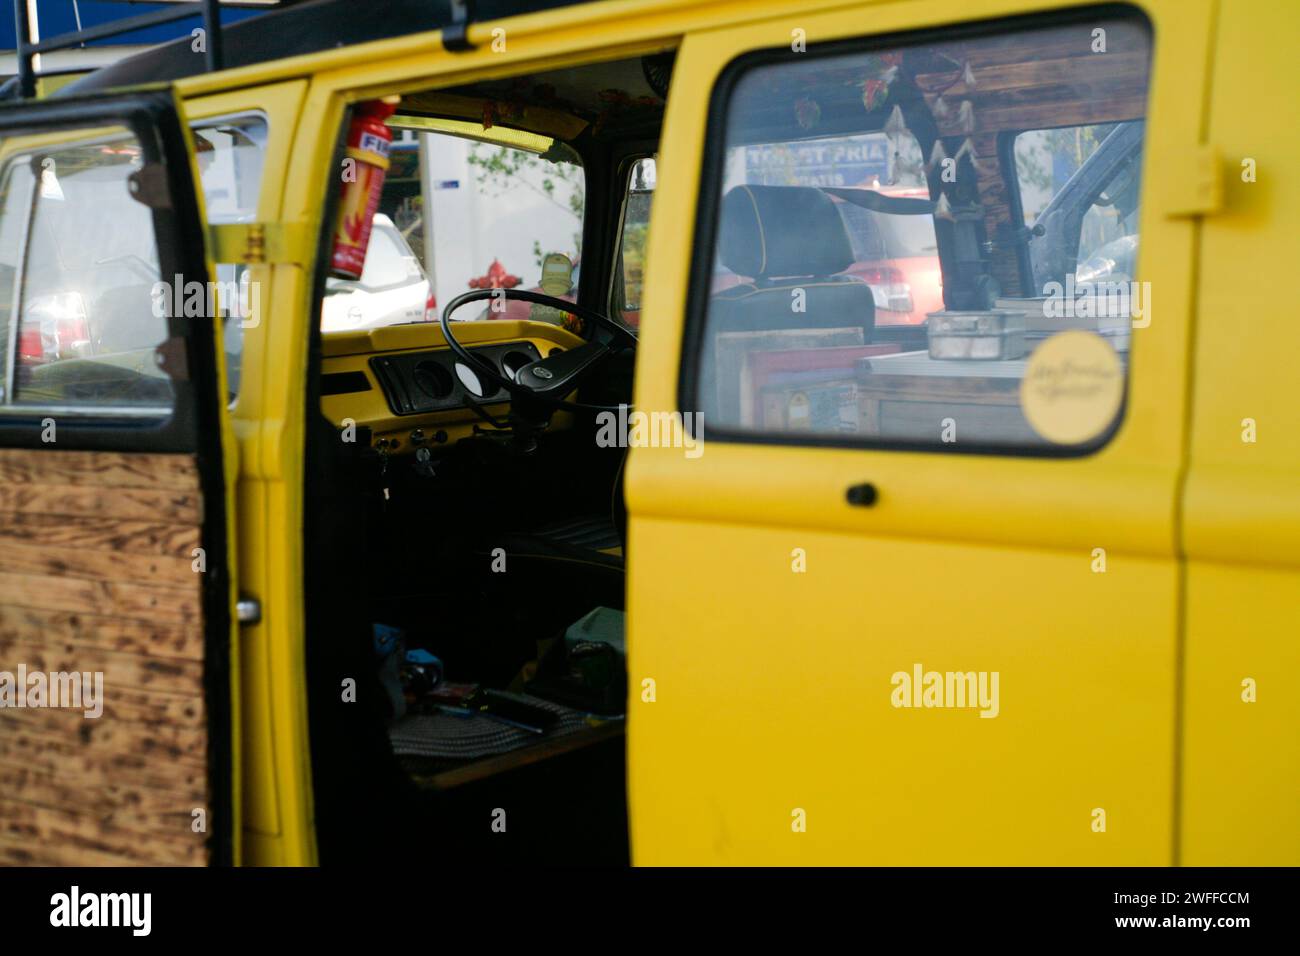 Yellow Volkswagen kombi or bus parked in the side road Stock Photo